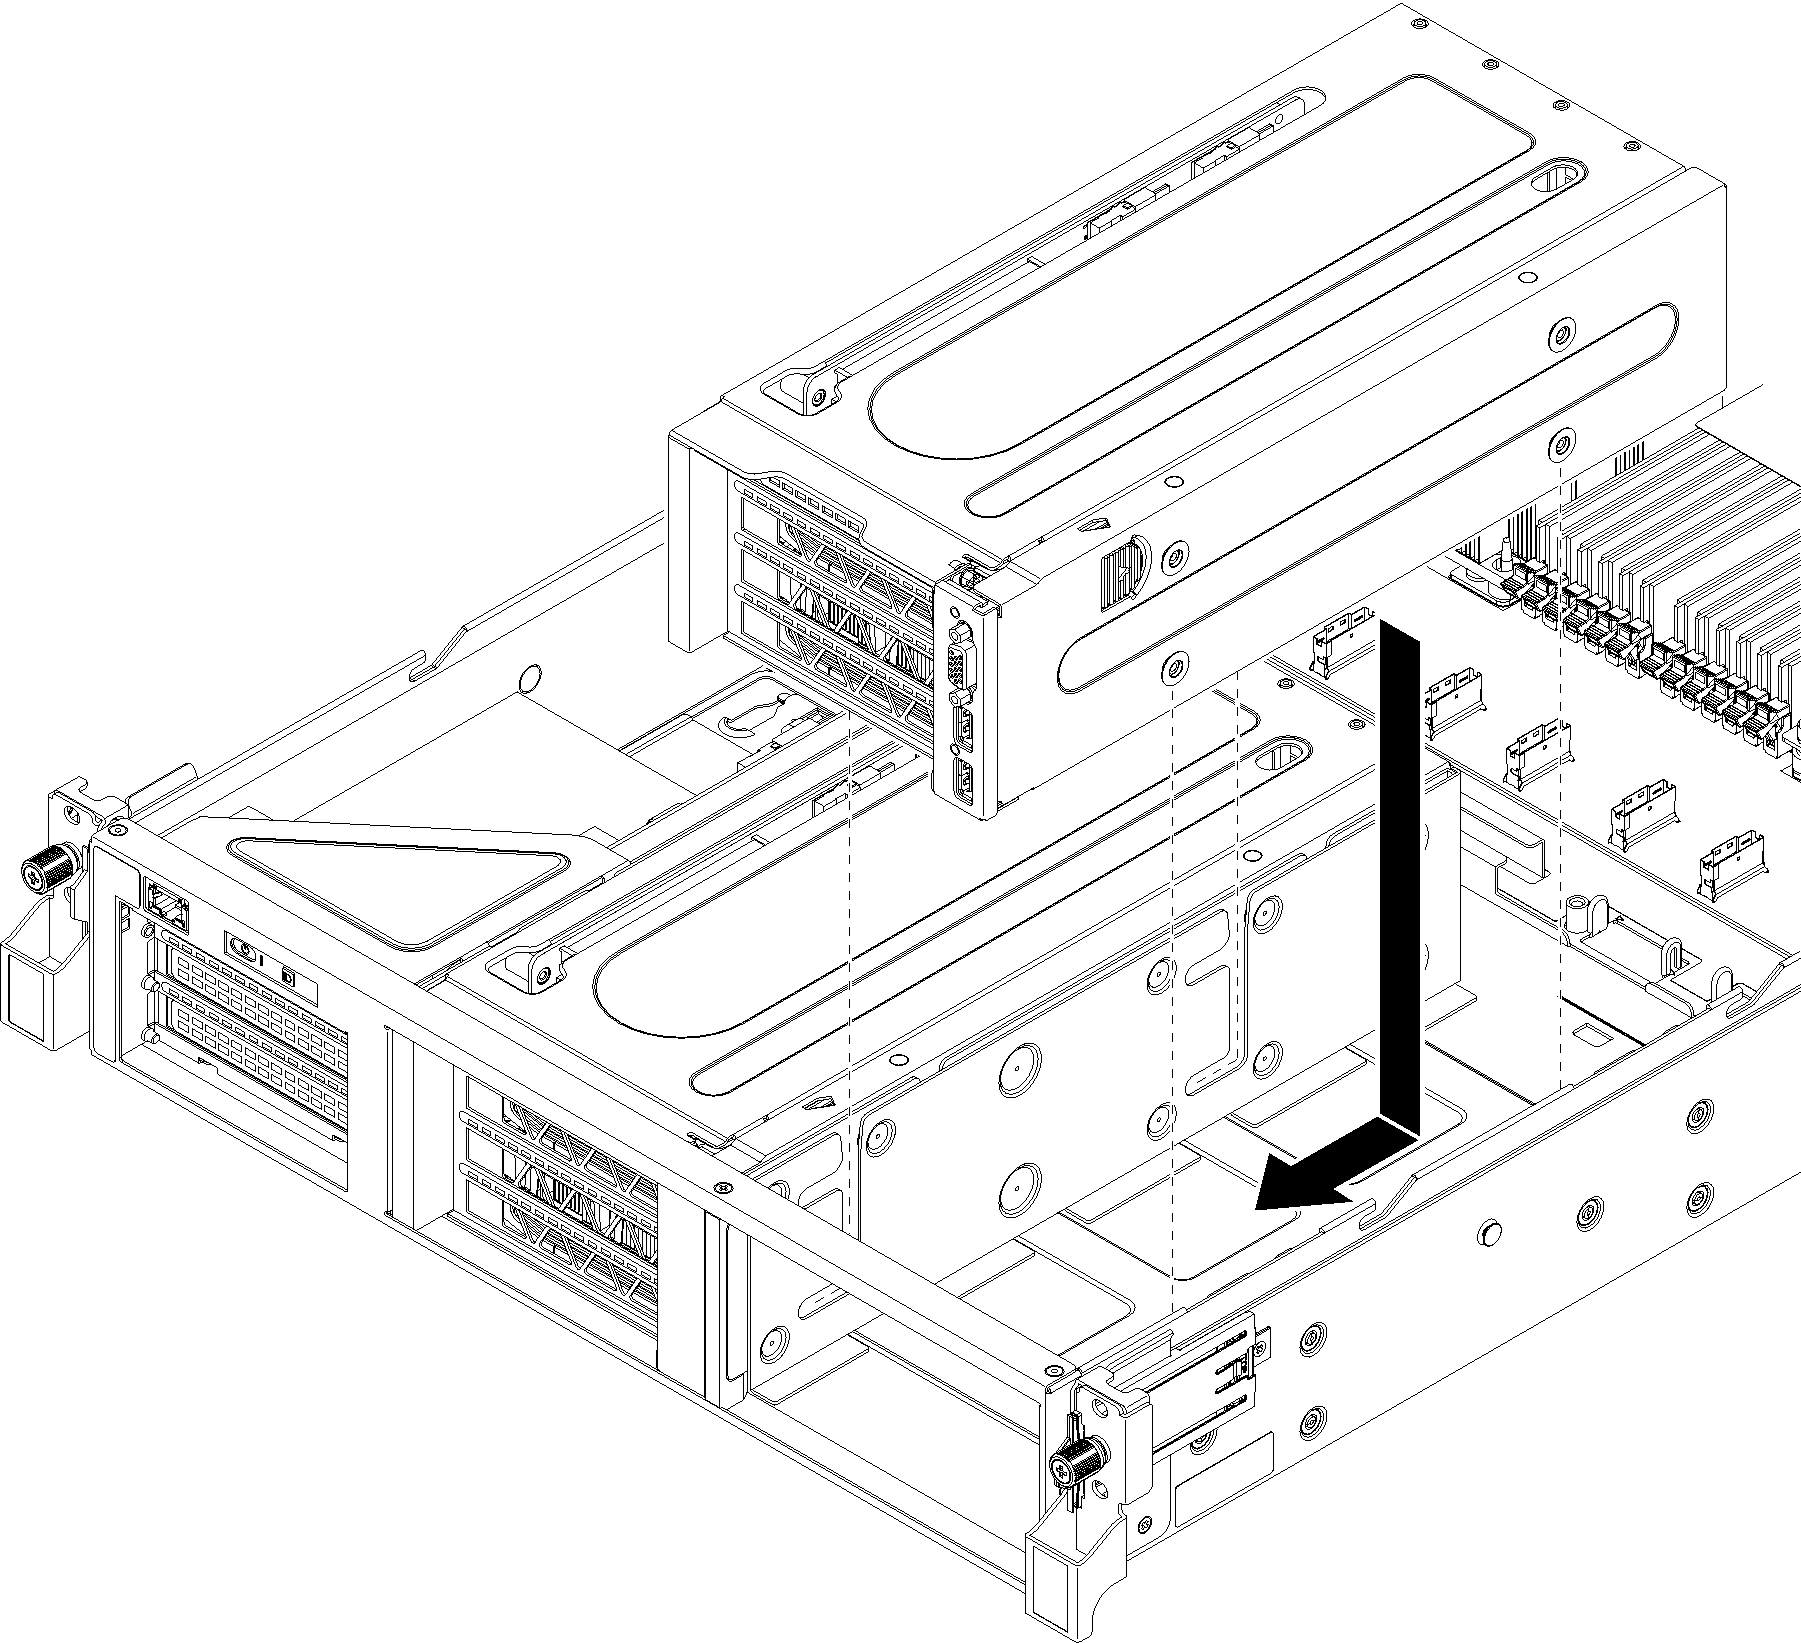 PCIe expansion cage installation